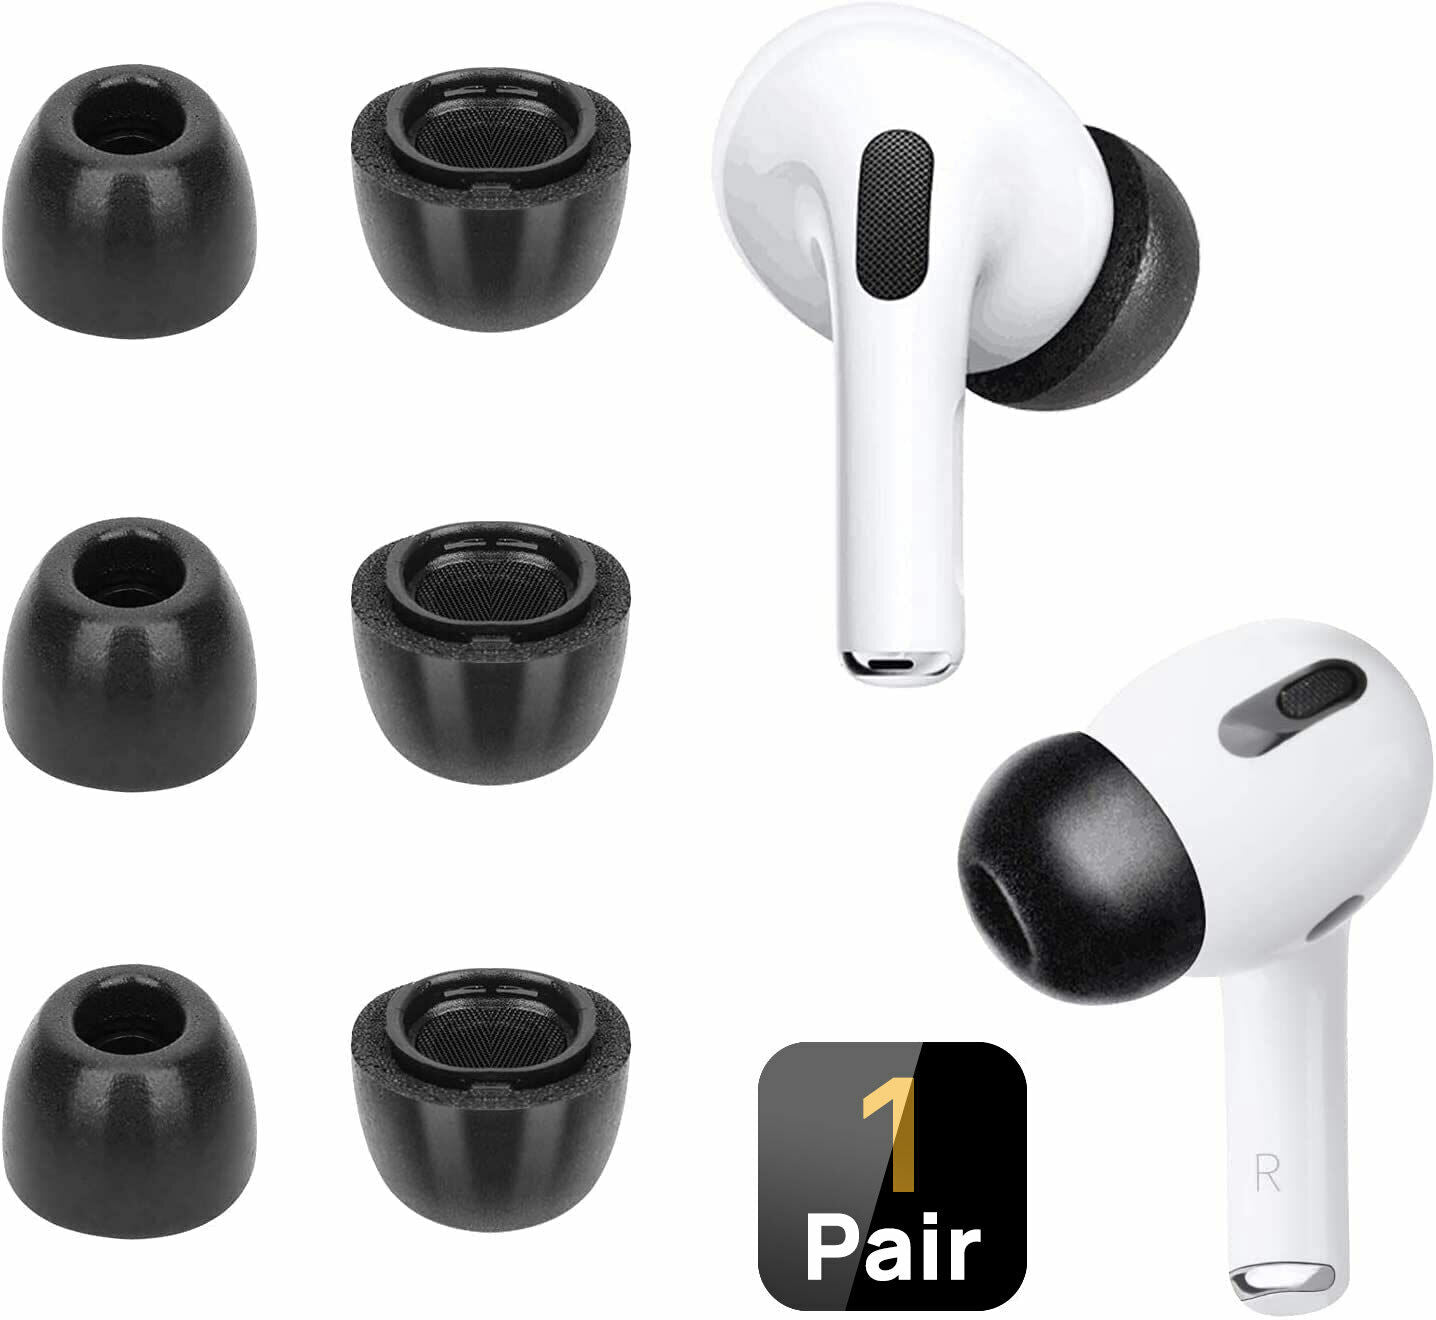 Replacement Memory Foam For AirPods Pro Earbuds Silicone Ear Tips Earphone